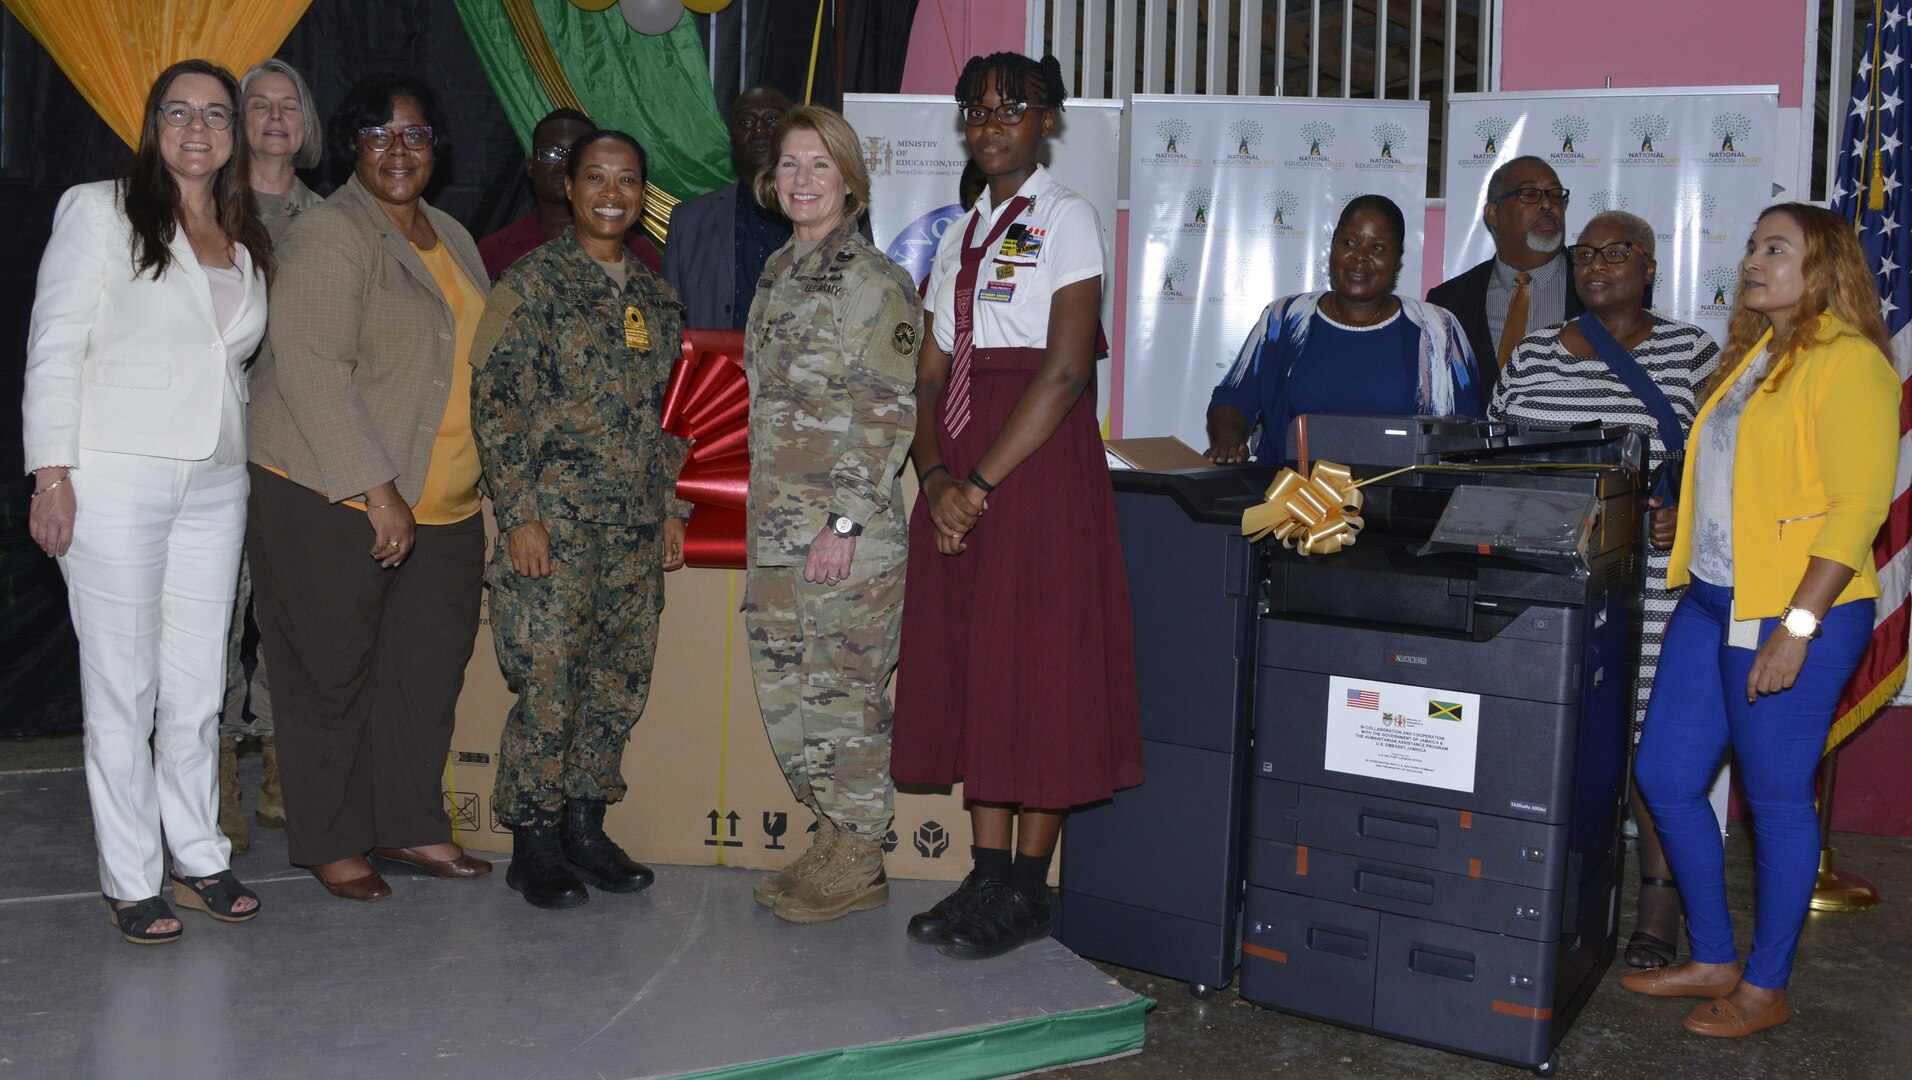 he commander of U.S. Southern Command, U.S. Army Gen. Laura Richardson, poses for a photo along with Jamaican dignitaries and students.